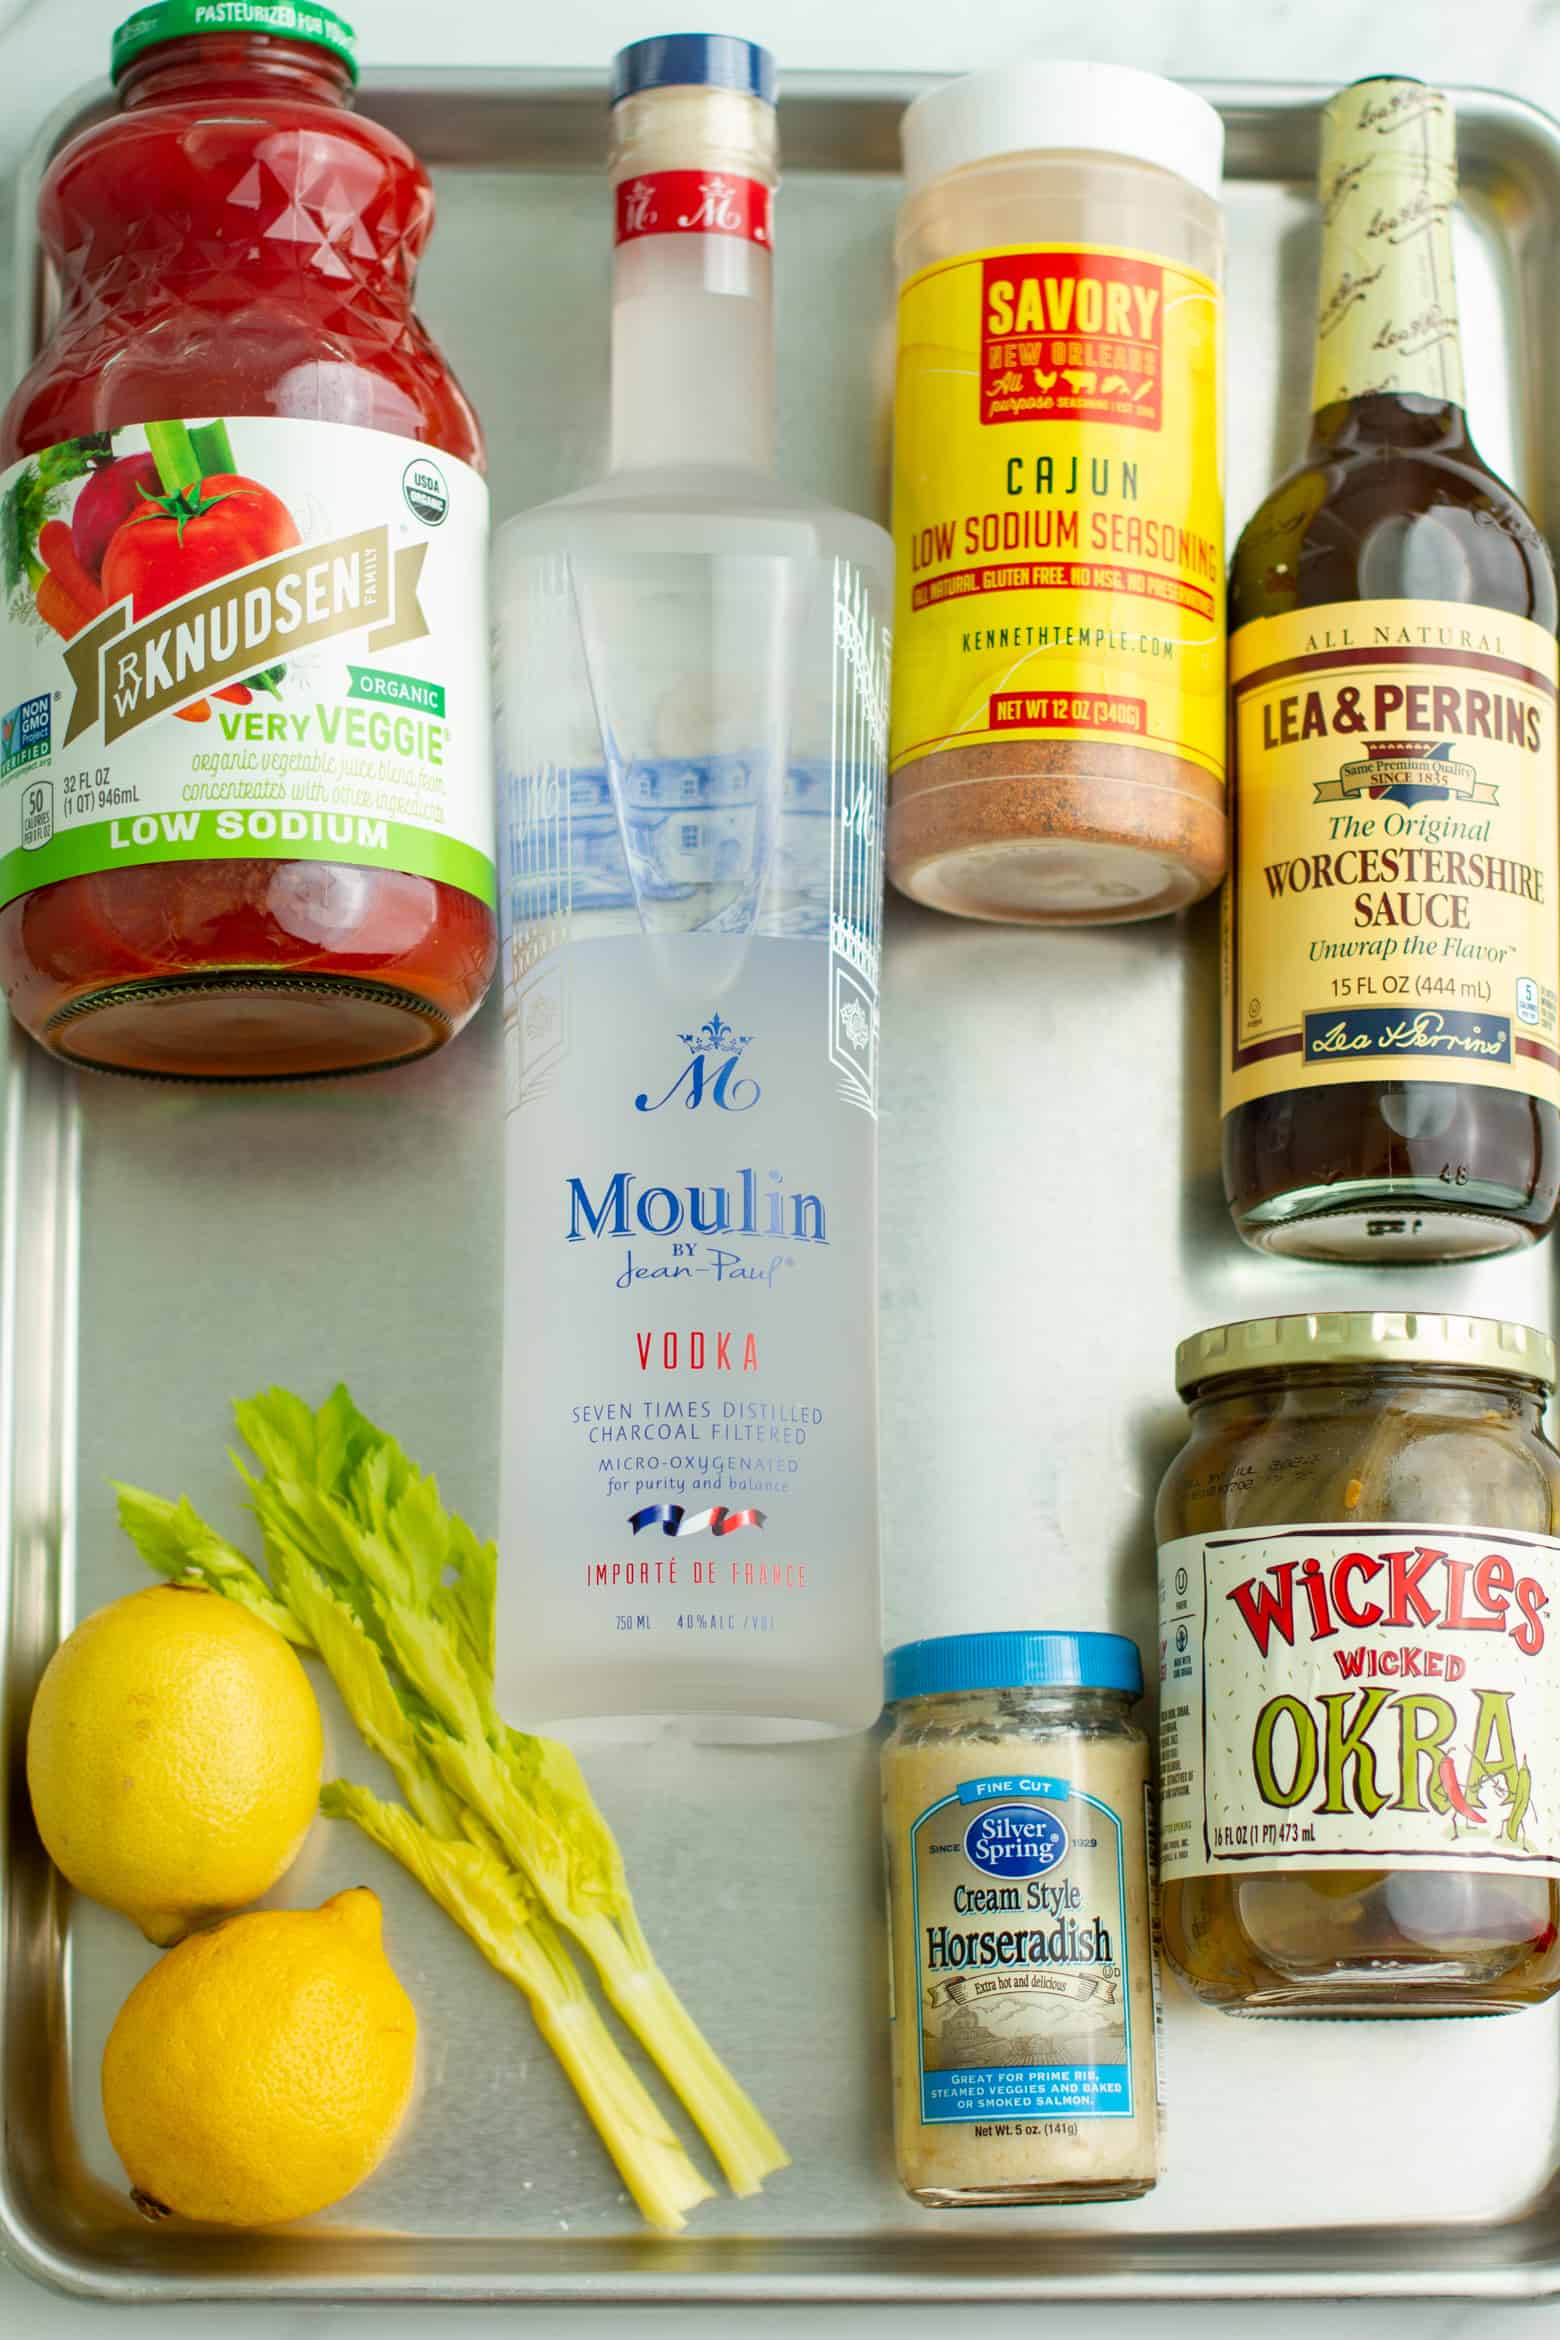 New Orleans Bloody Mary ingredients